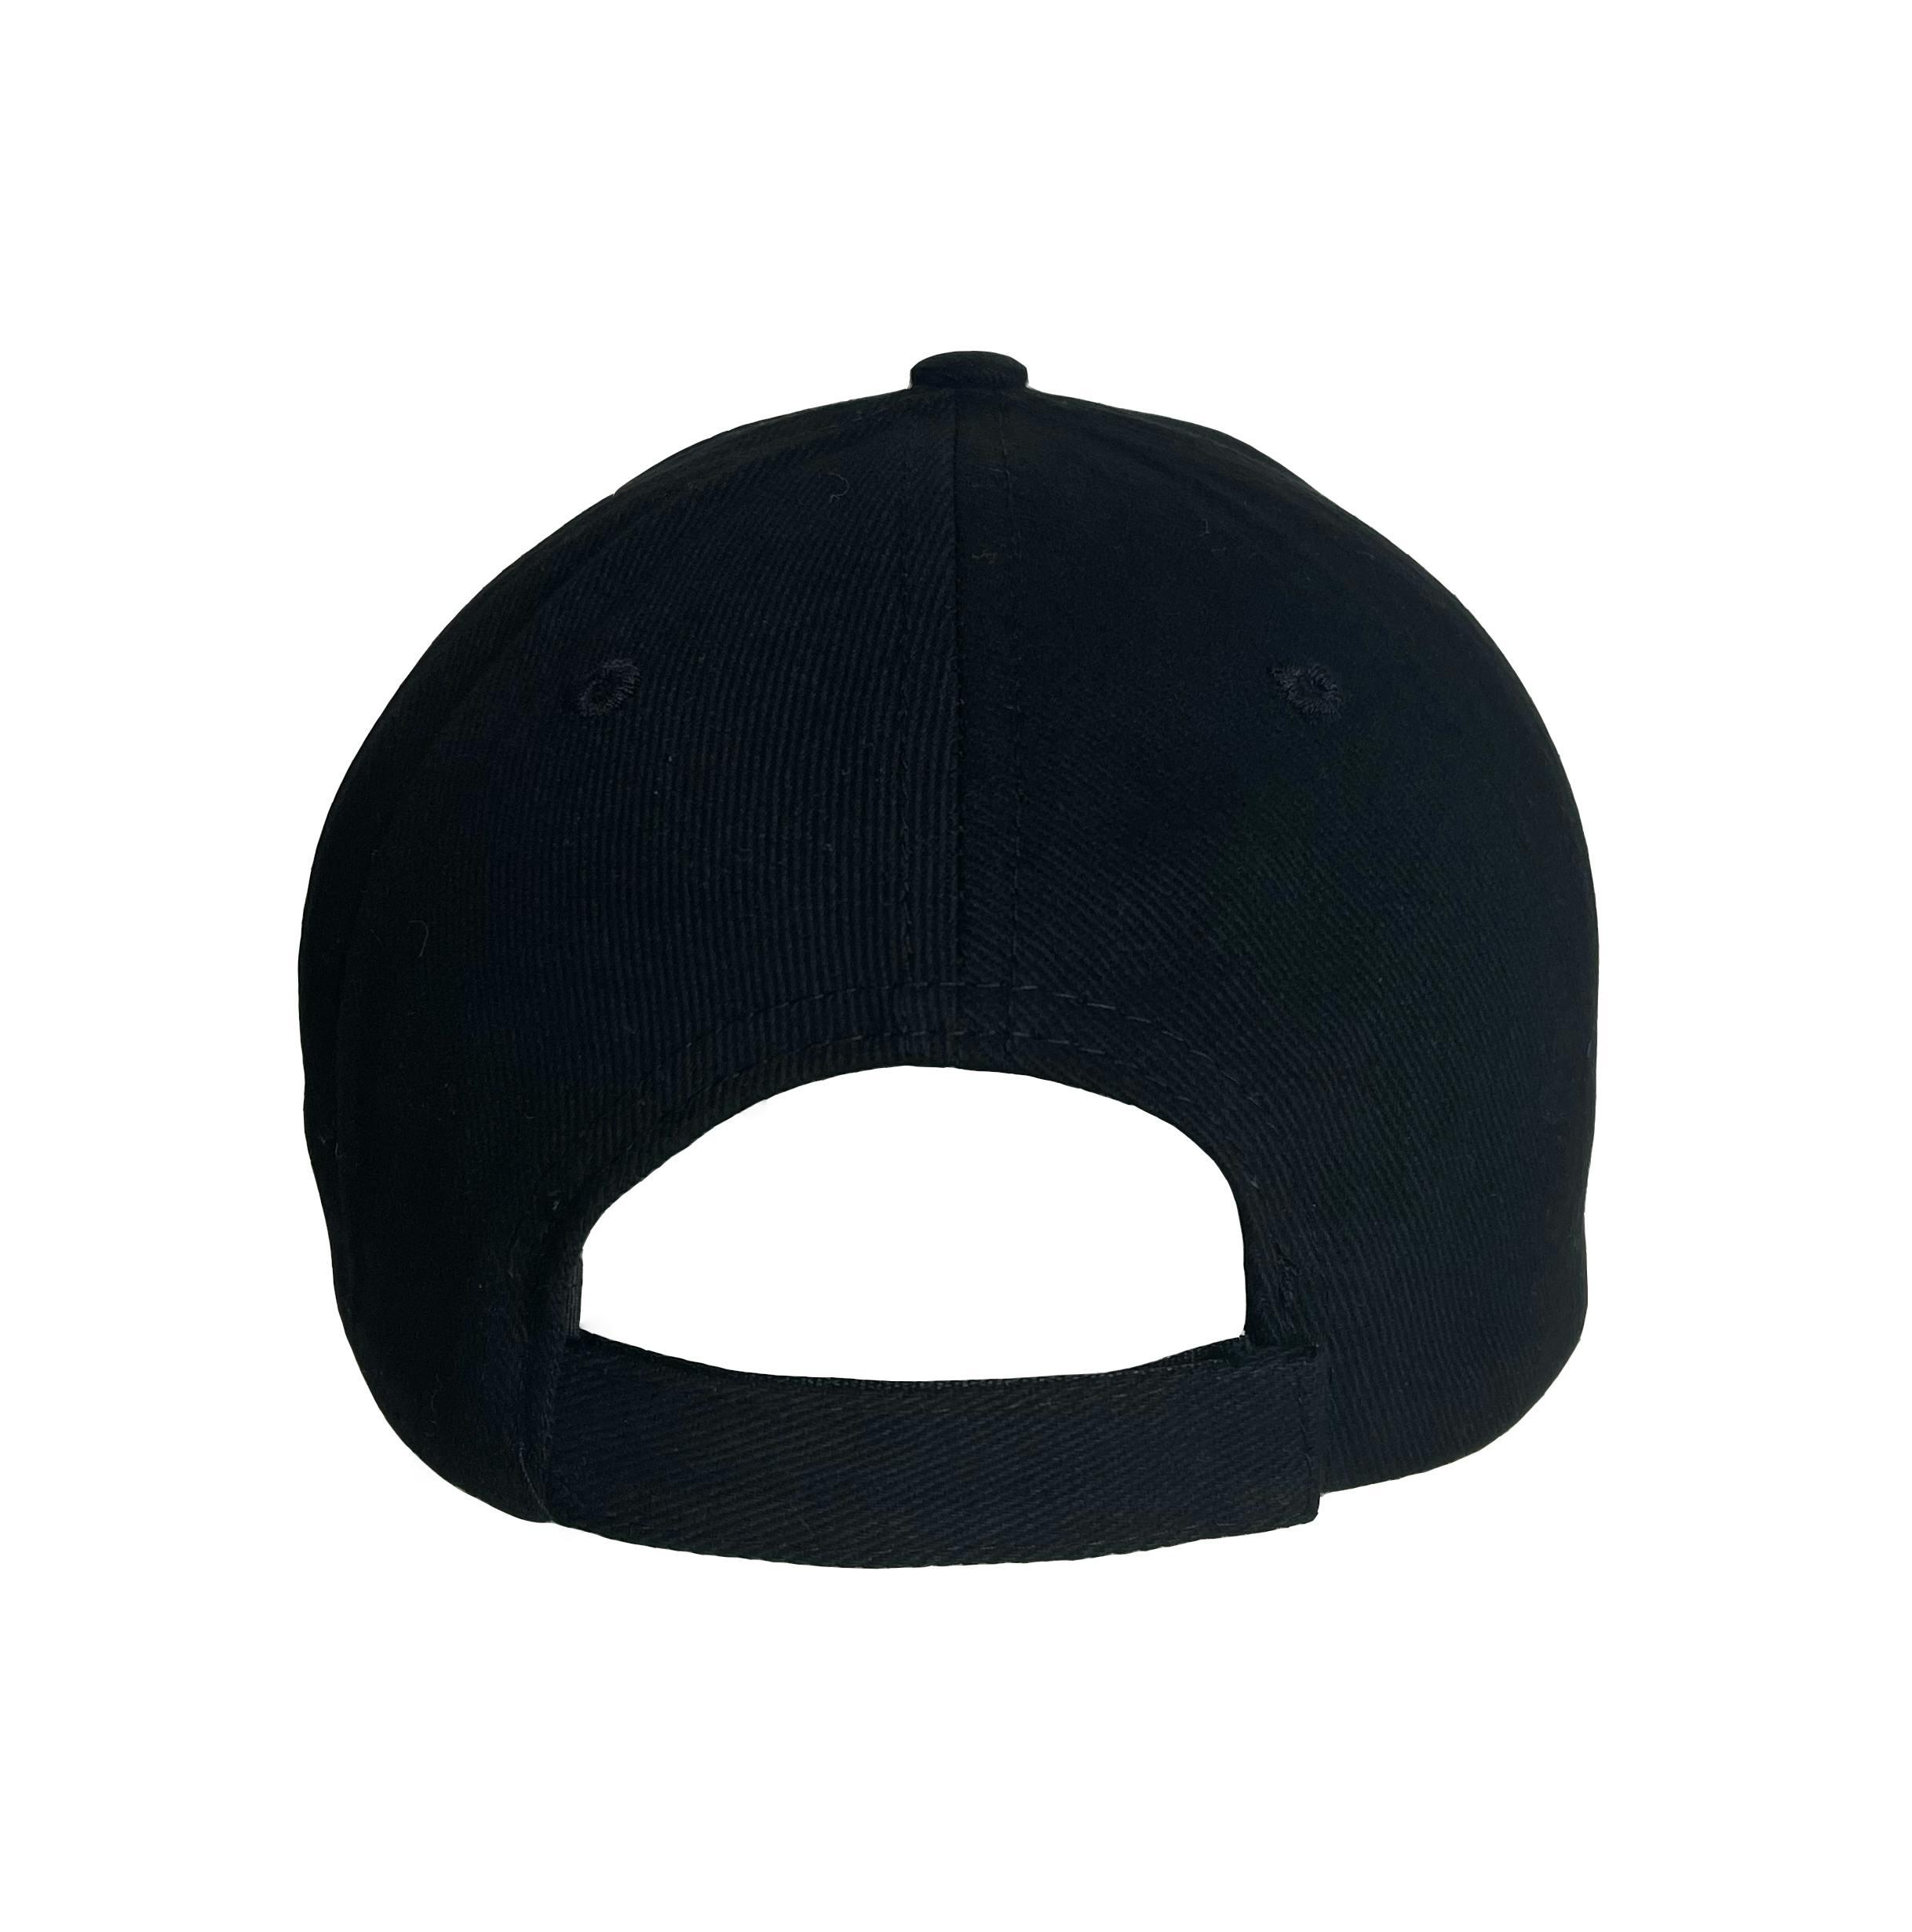 6 PANEL HEAVY BRUSHED COTTON CAP WITH VELCRO CLOSURE